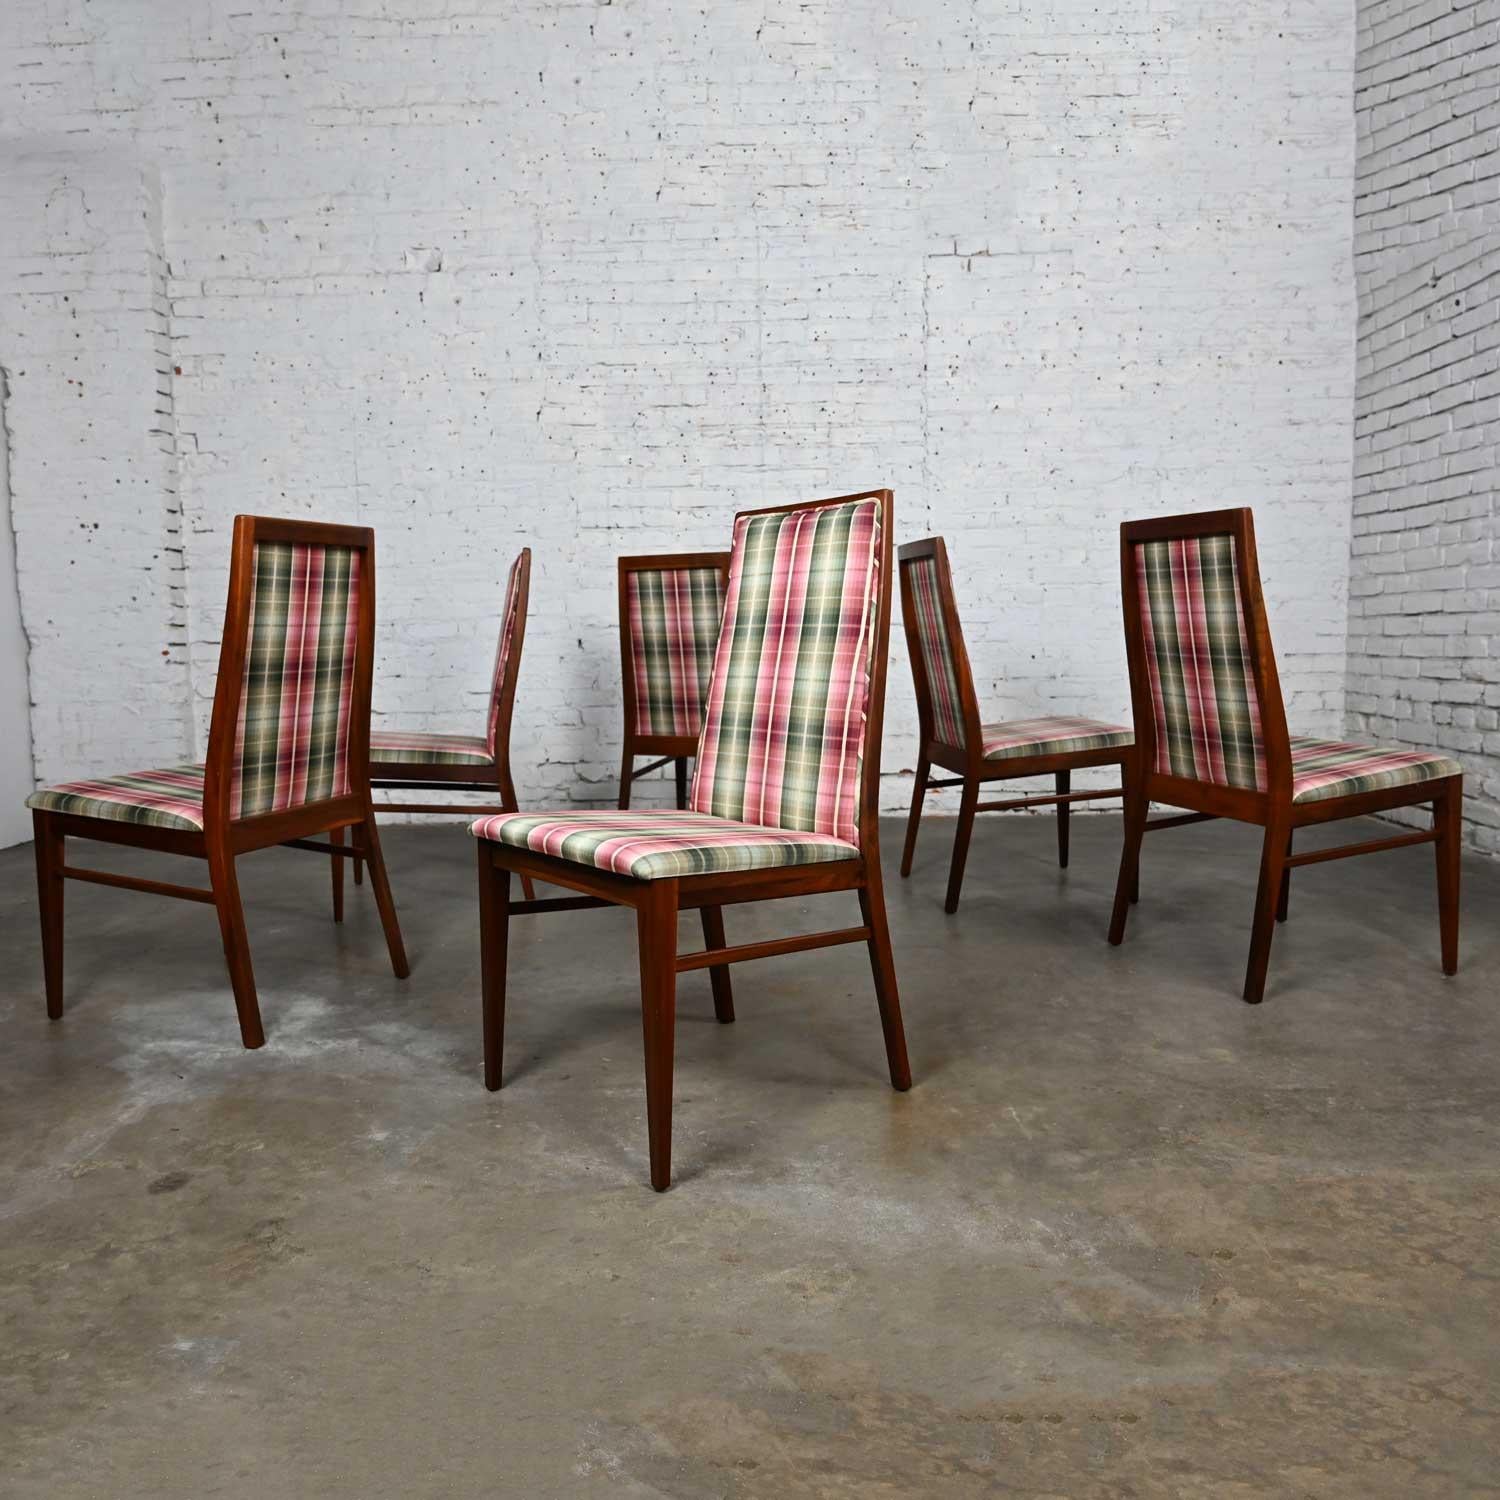 Fabulous vintage Mid-Century Modern Dillingham Espirit Line walnut dining chairs with maroon & green plaid fabric by Merton Gershun set of 6. Beautiful condition, keeping in mind that these are vintage and not new so will have signs of use and wear.